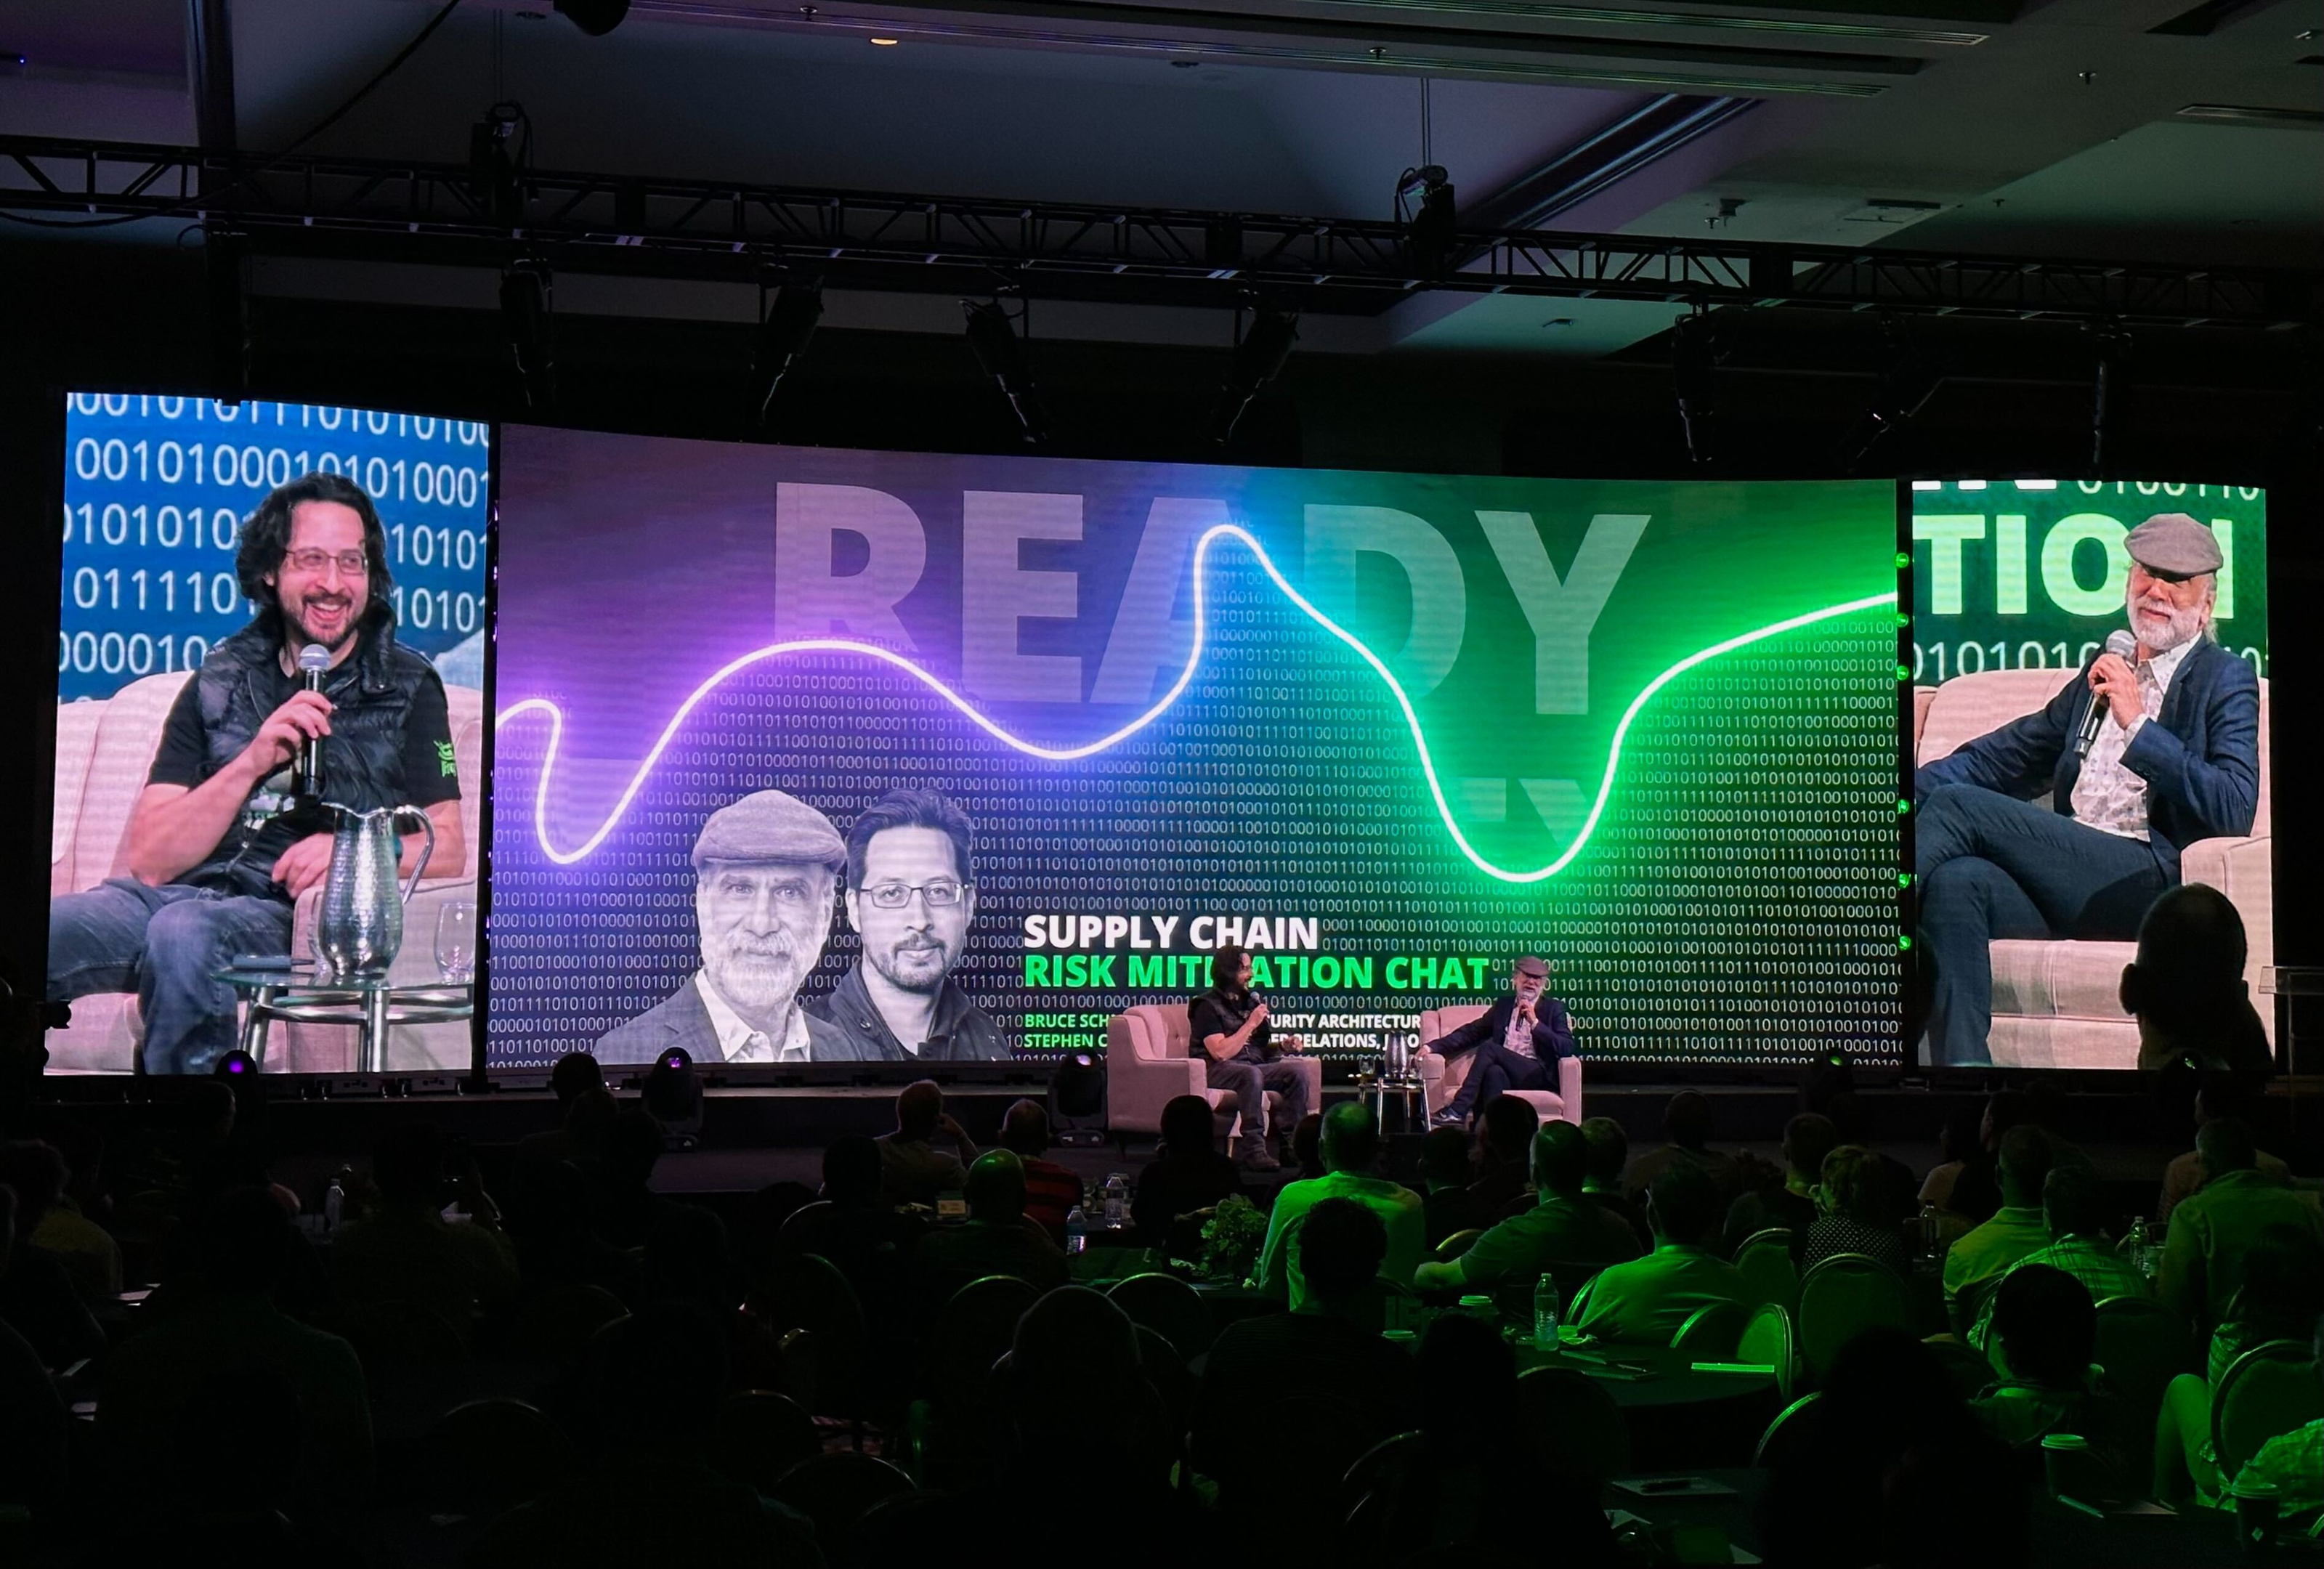 Fireside chat with security guru and New York Times best-selling author, Bruce Schneier, and JFrog's vice president of developer relations, Stephen Chin